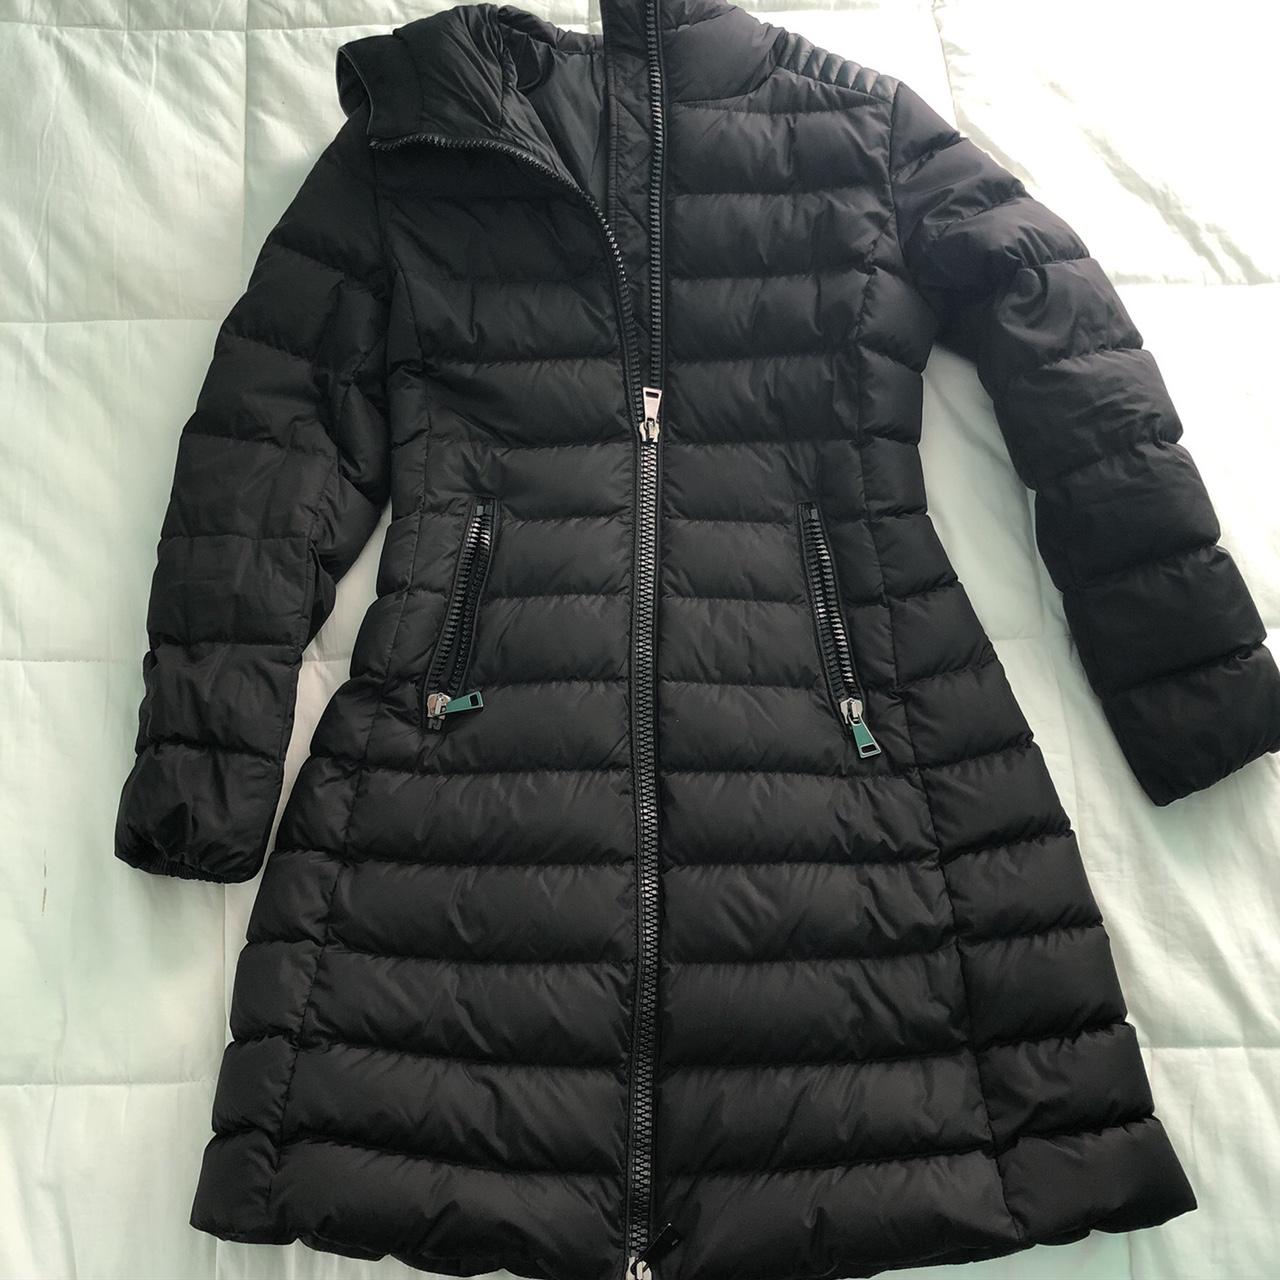 MONCLER TALEV GIUBBOTTO JACKET!! Perfect for the... - Depop